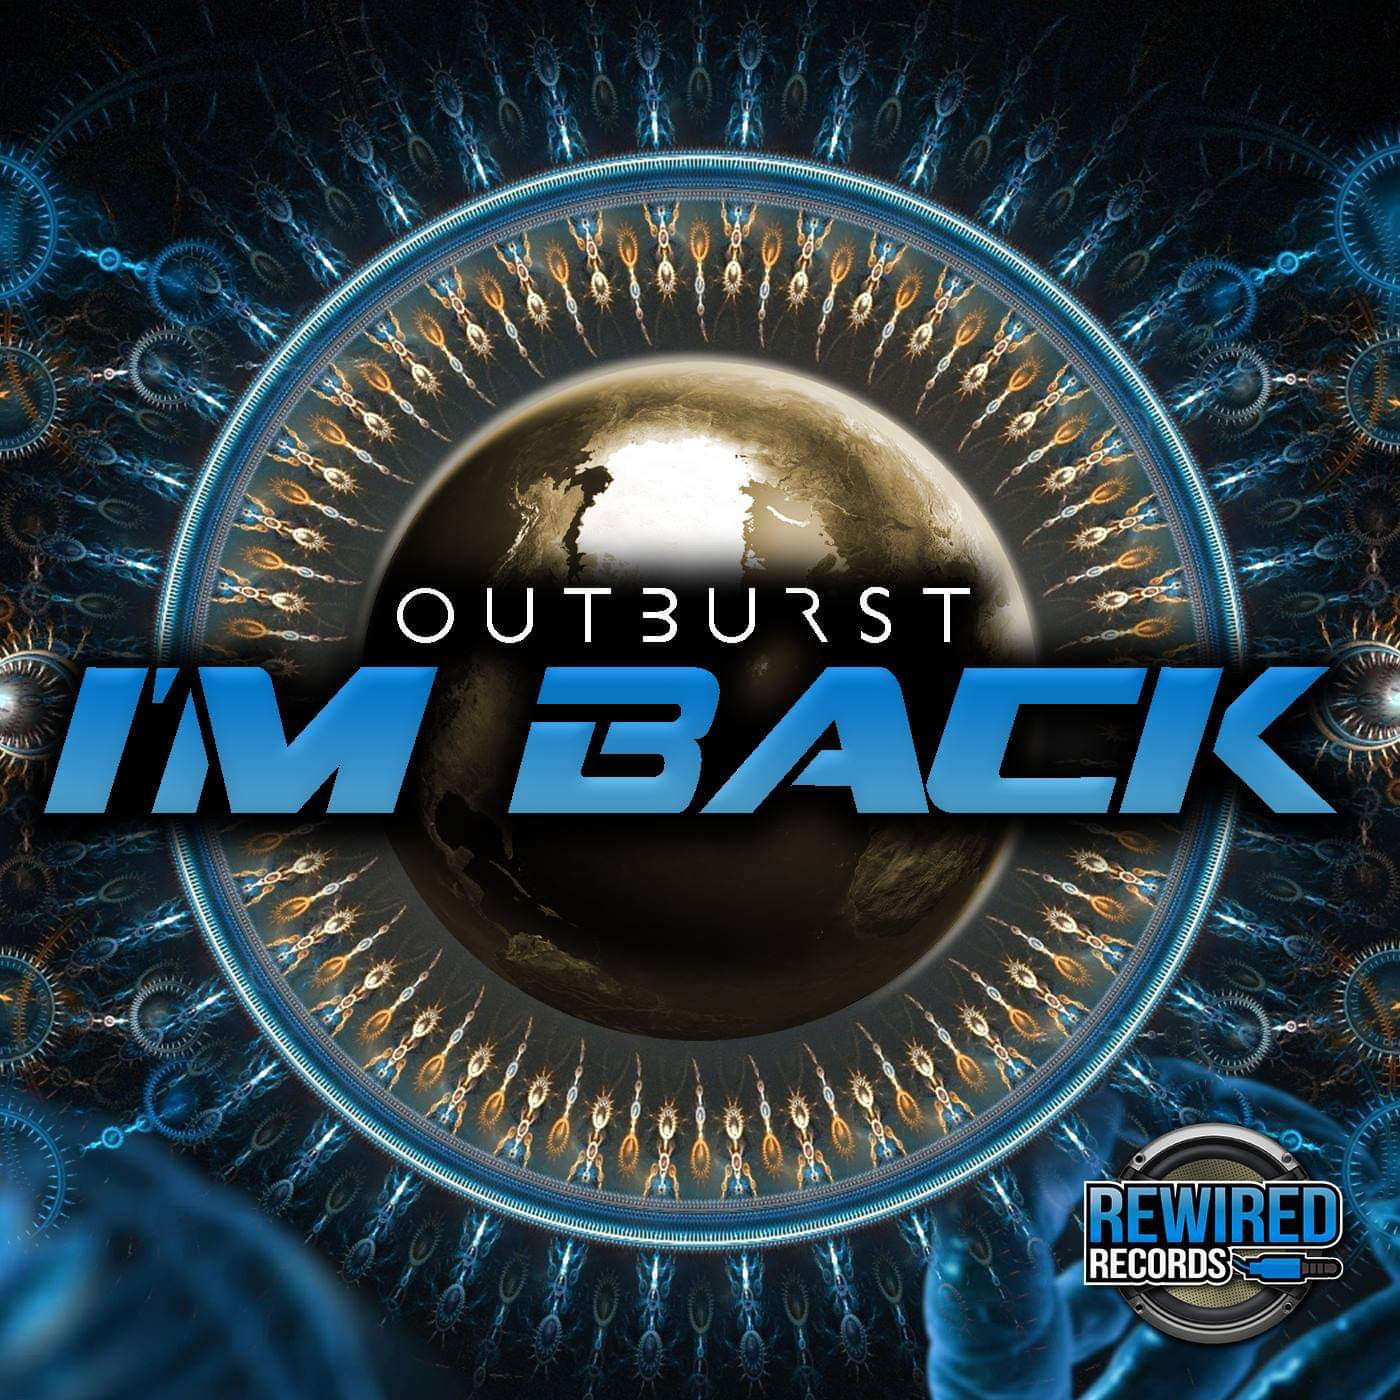 Outburst - I'm Back - Rewired Records